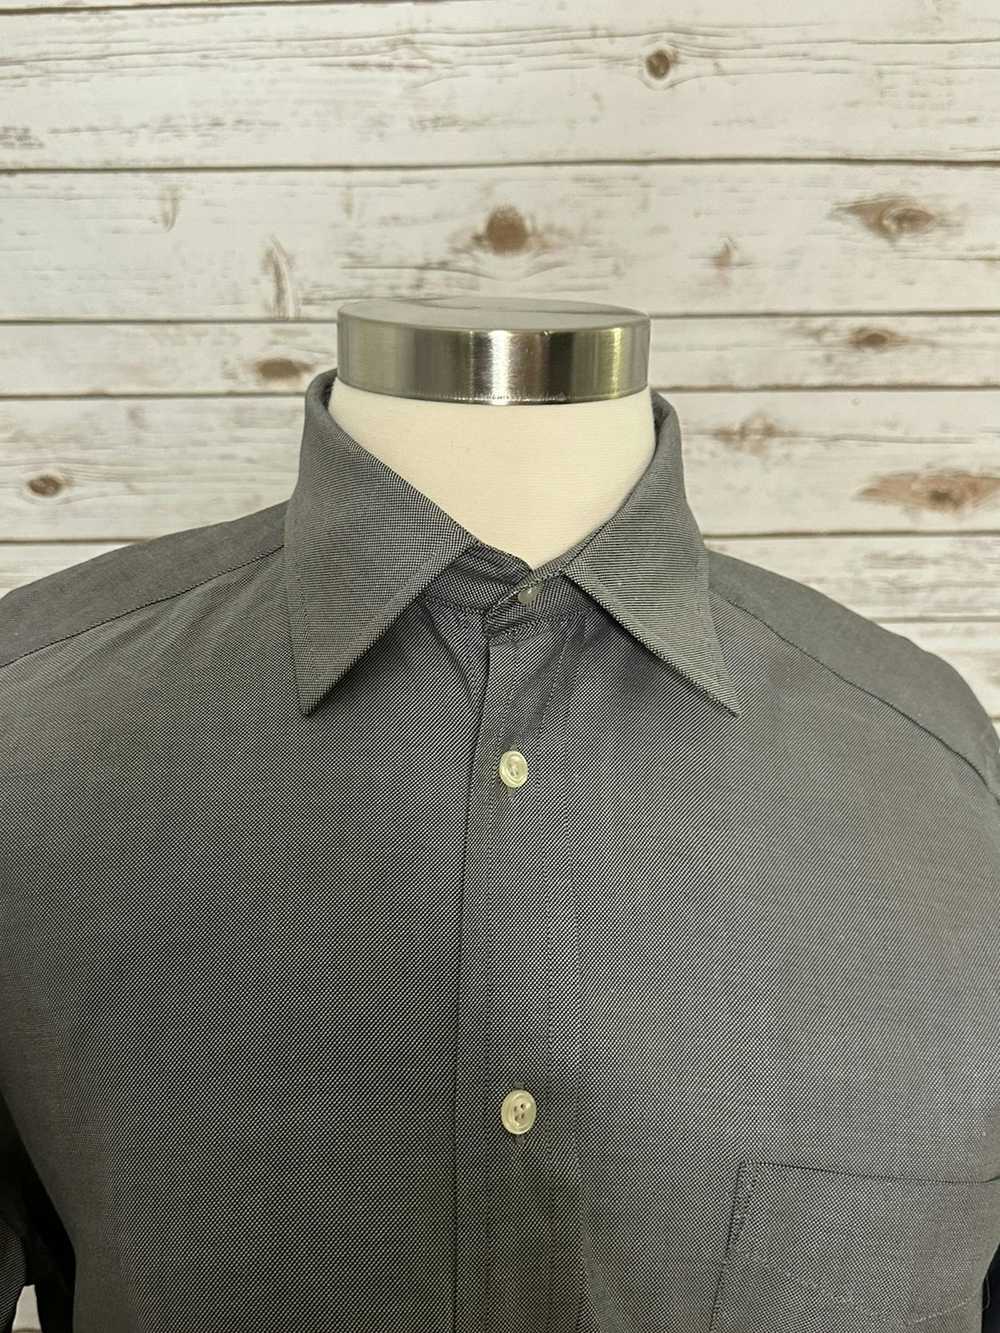 Faconnable Faconnable button-down shirt - image 2